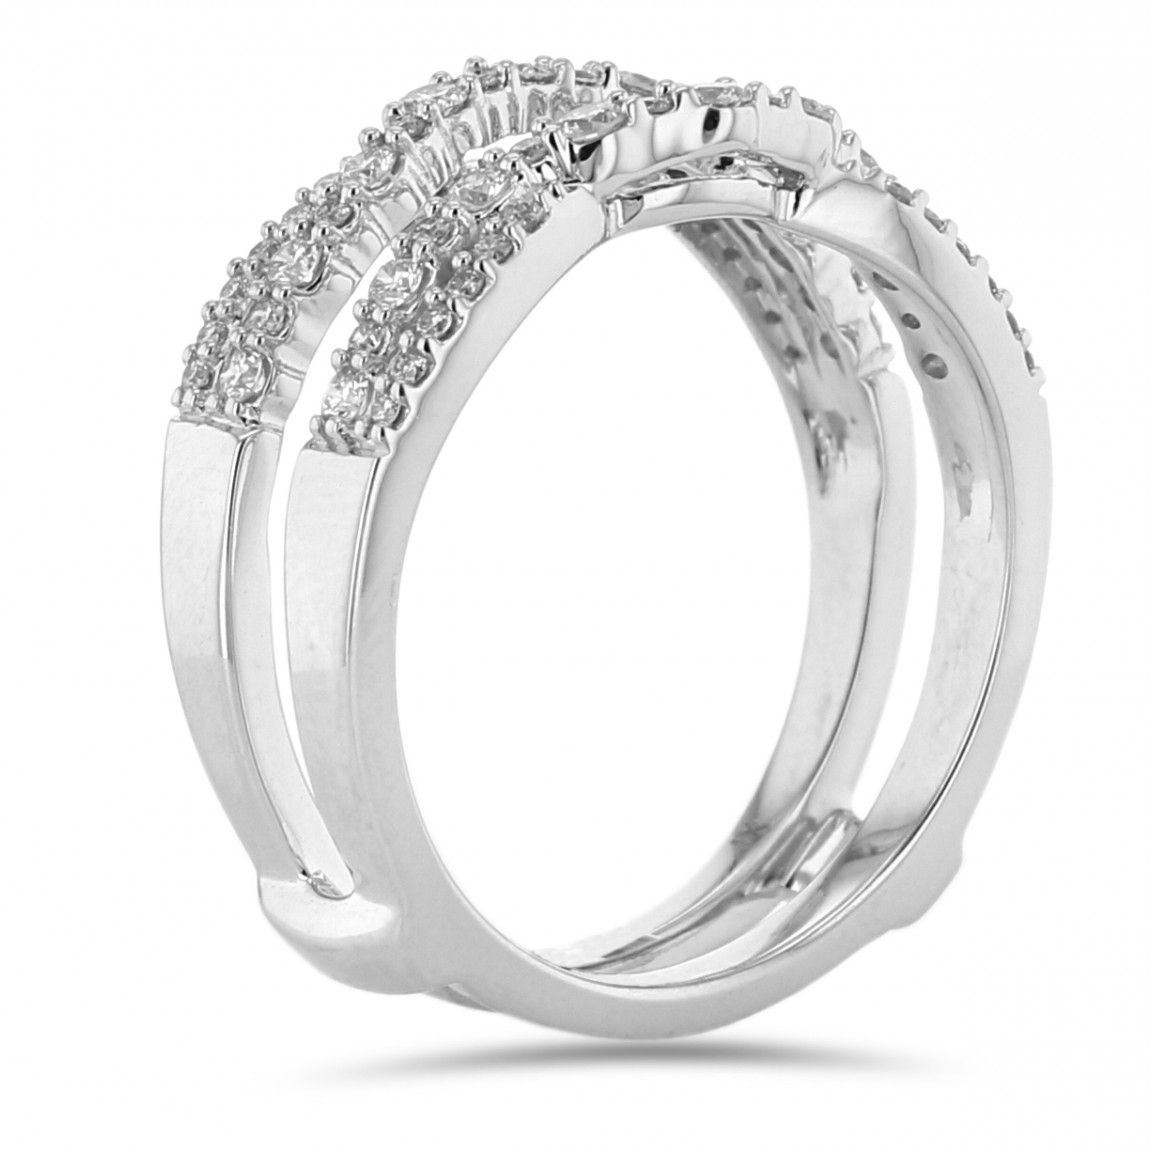 Diamond Cradle Wedding Band, Ring Enhancer, Curved Twist, 14k White Gold,   (View 21 of 25)